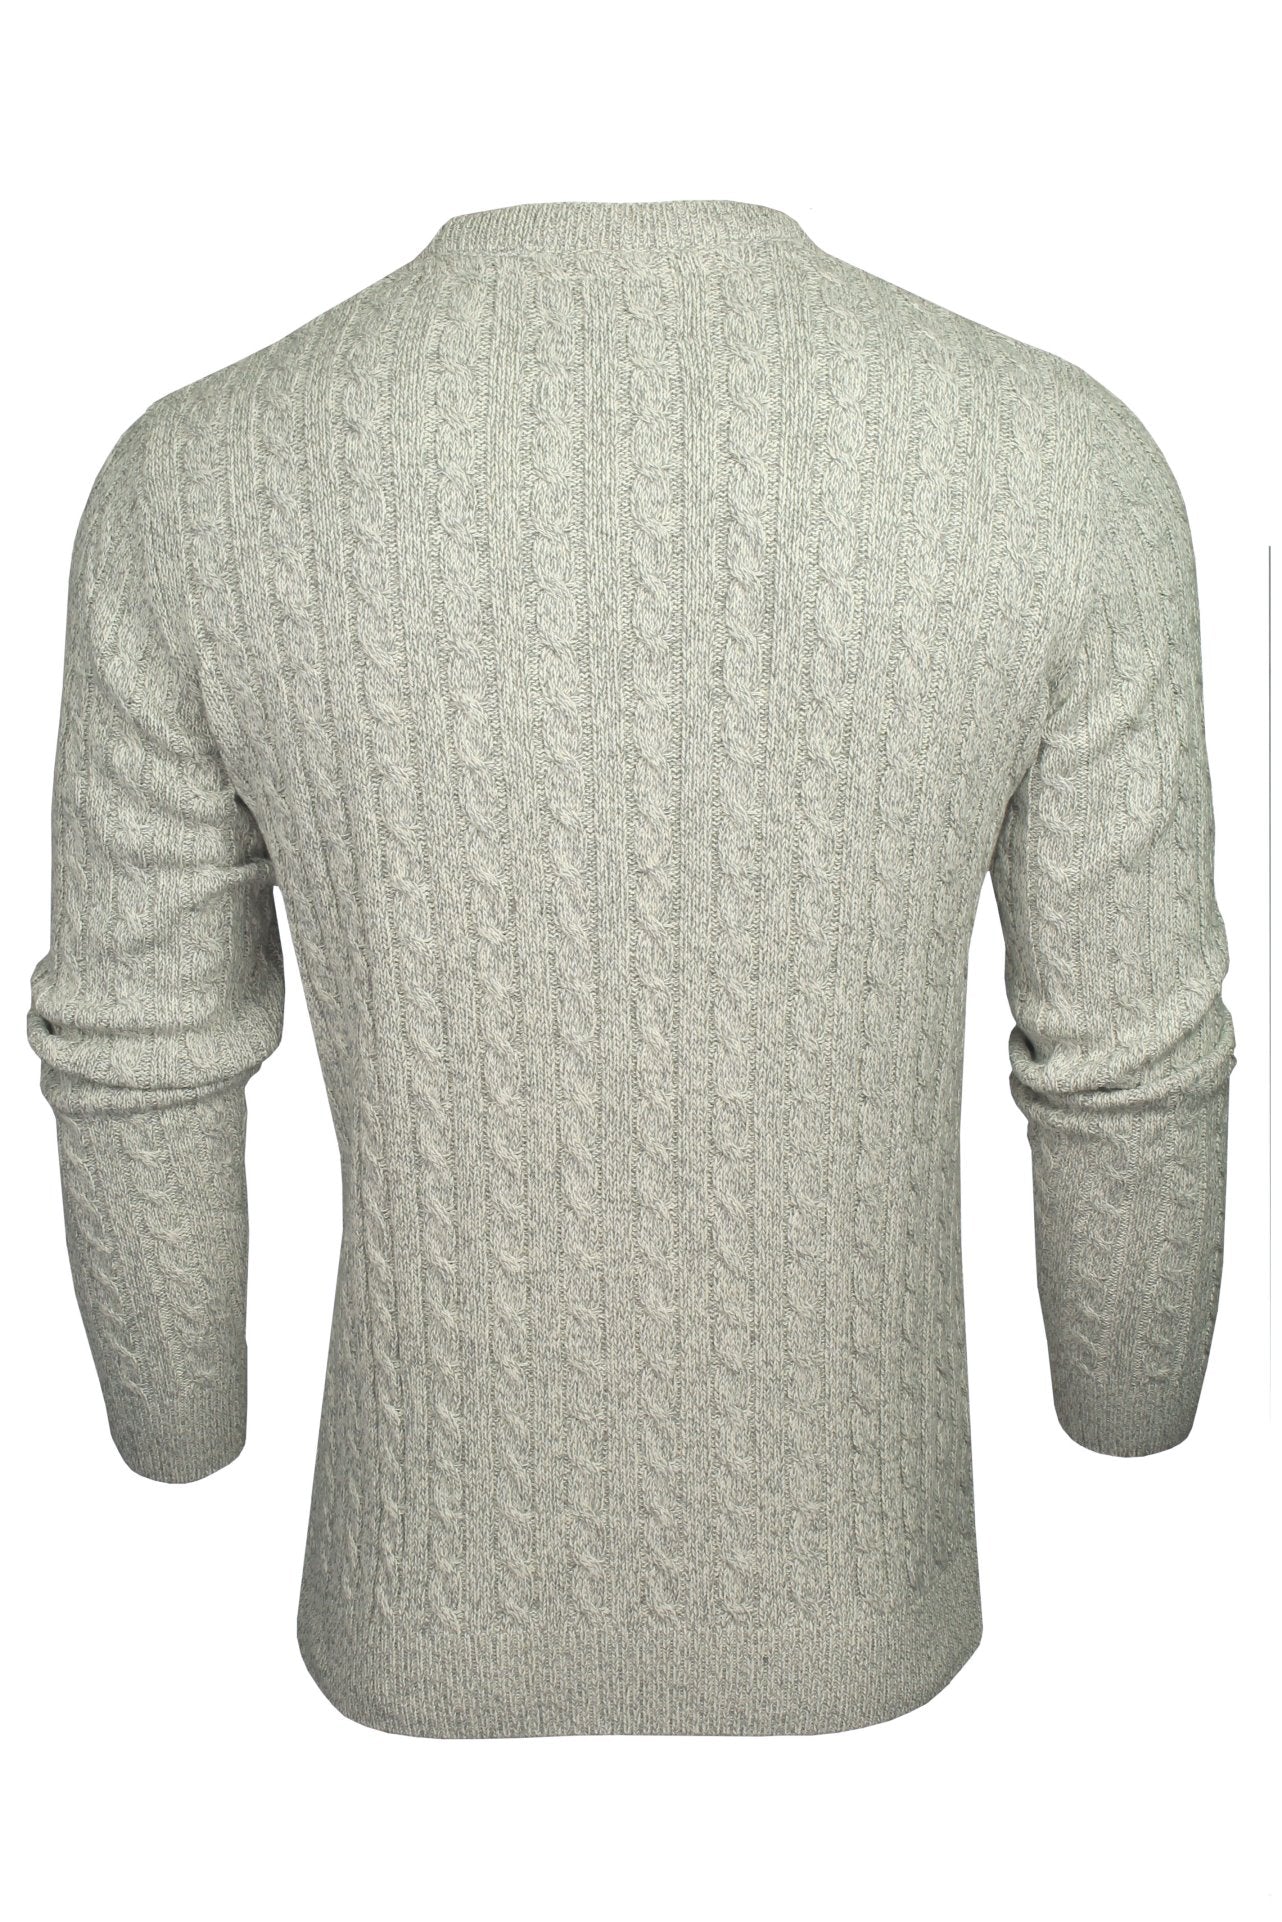 Xact Men's Sustainable Cotton Rich Cable Knit Jumper-3